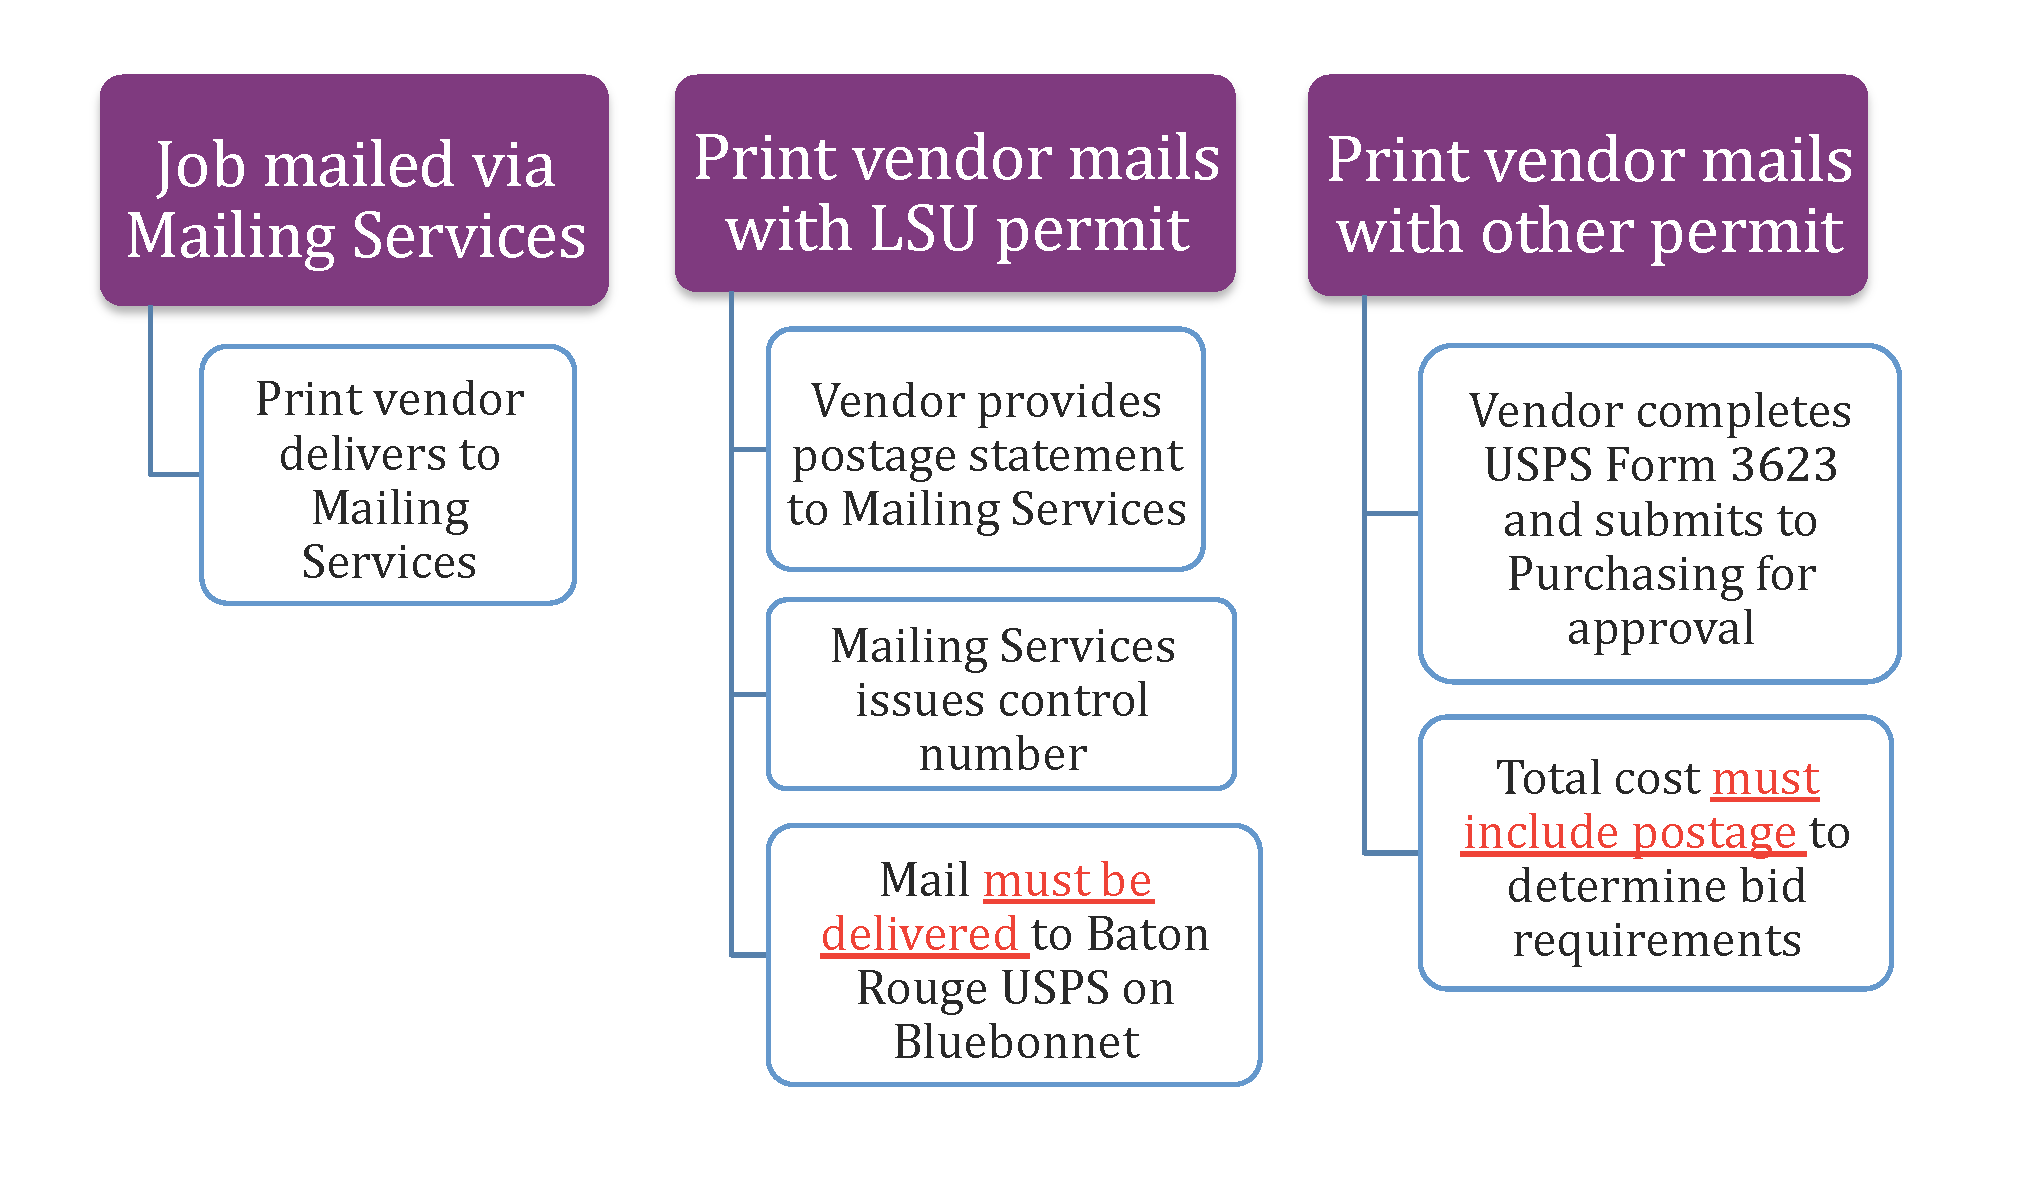 Image of chart to determine the process of a print job. The chart has three top sections: one is Job mailed via mailing services, the second is Print vendor mails with LSU permit, and the third is Print vendor mails with other permit. Under the first section, when mailing a job via mailing services, the print vendor delivers directly to mailing services. Under the second section, a vendor with an LSU permit, the following will happen: The vendor provides postage statement to mailing services, mailing services issues a control number, and the resulting mail must be delivered to baton rouge USPS on blue bonnet. In the third section, a vendor with a different permit, the following will happen: vendor completes USPS form 3623 and submits to purchasing for approval, and total cost must include postage to determine bid requirements.